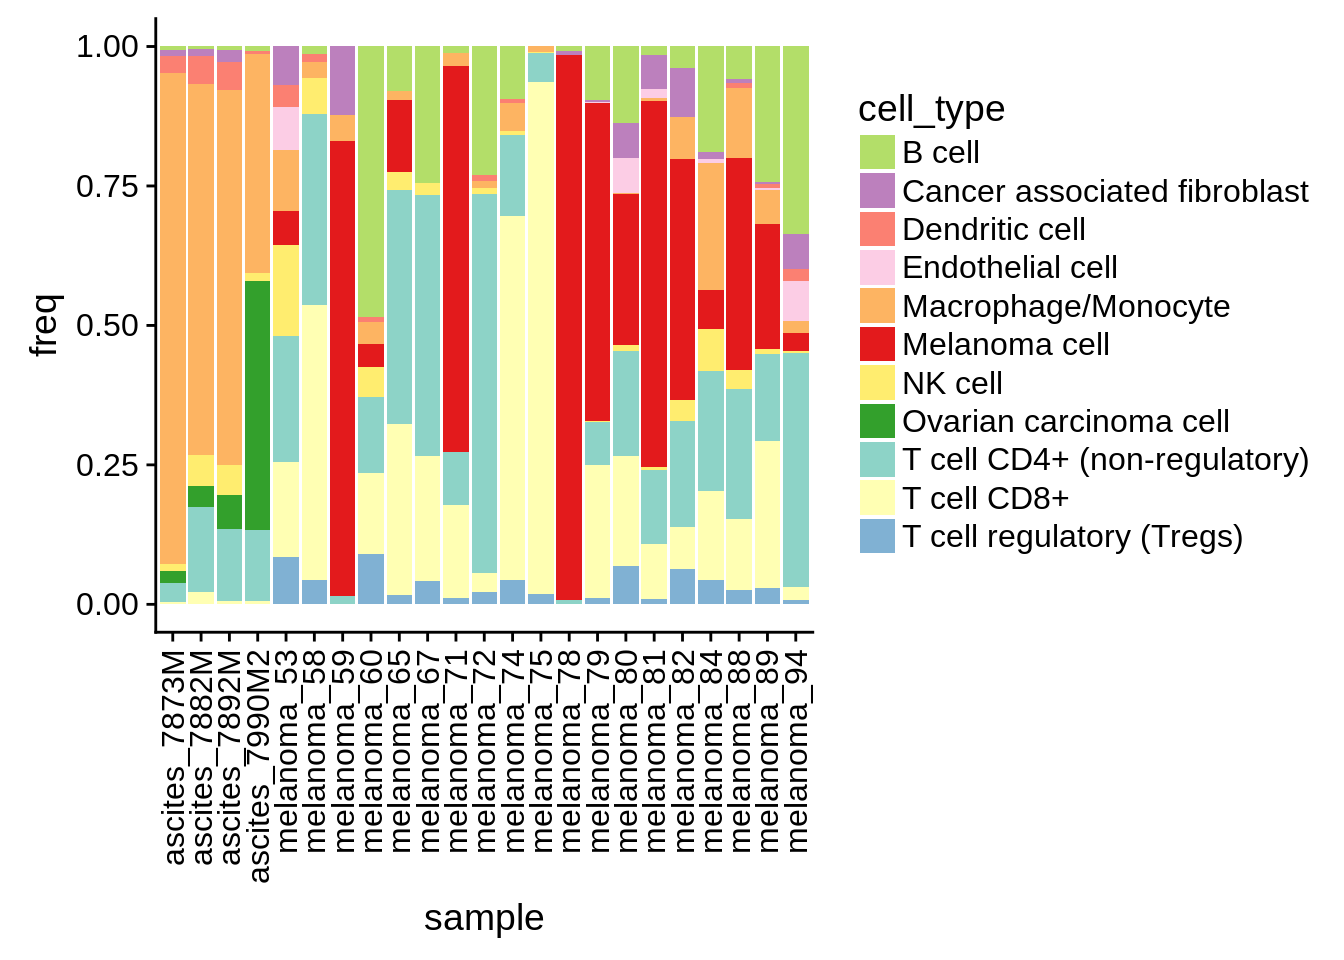 proportion of cell types by tumor sample